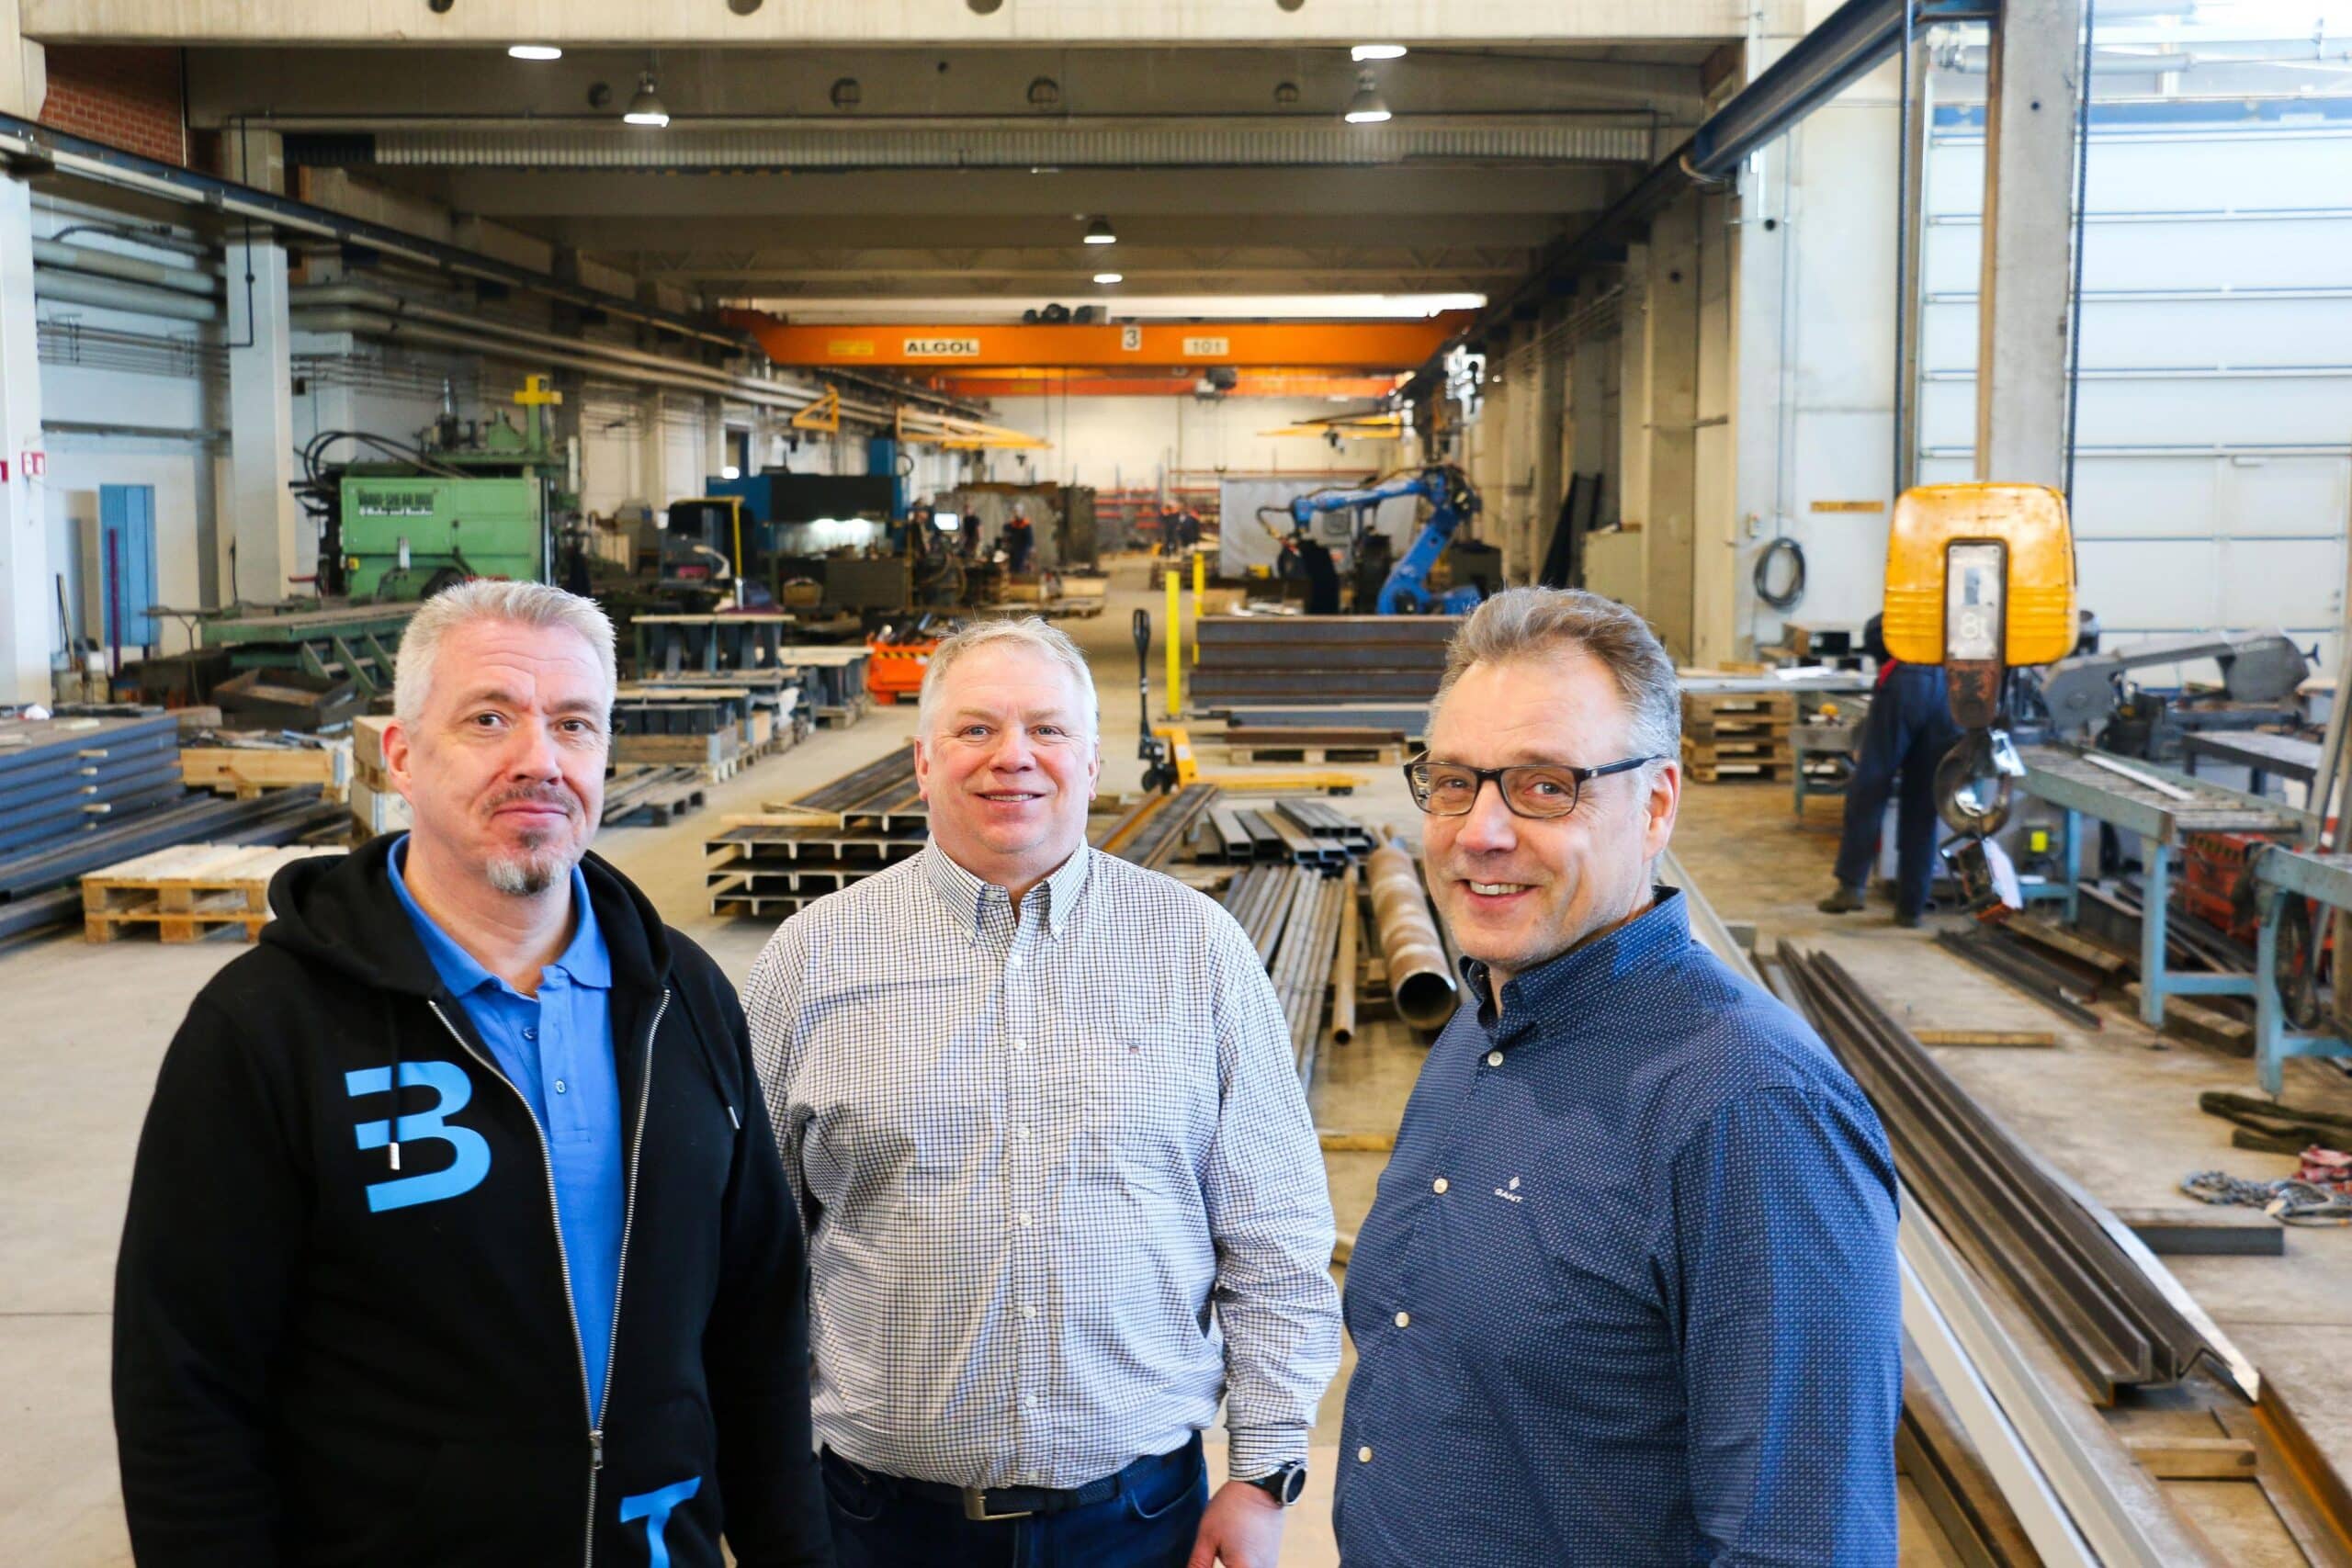 Machining Company EJT-Tekniikka Seeks Growth by Investing in Modern Production Technology